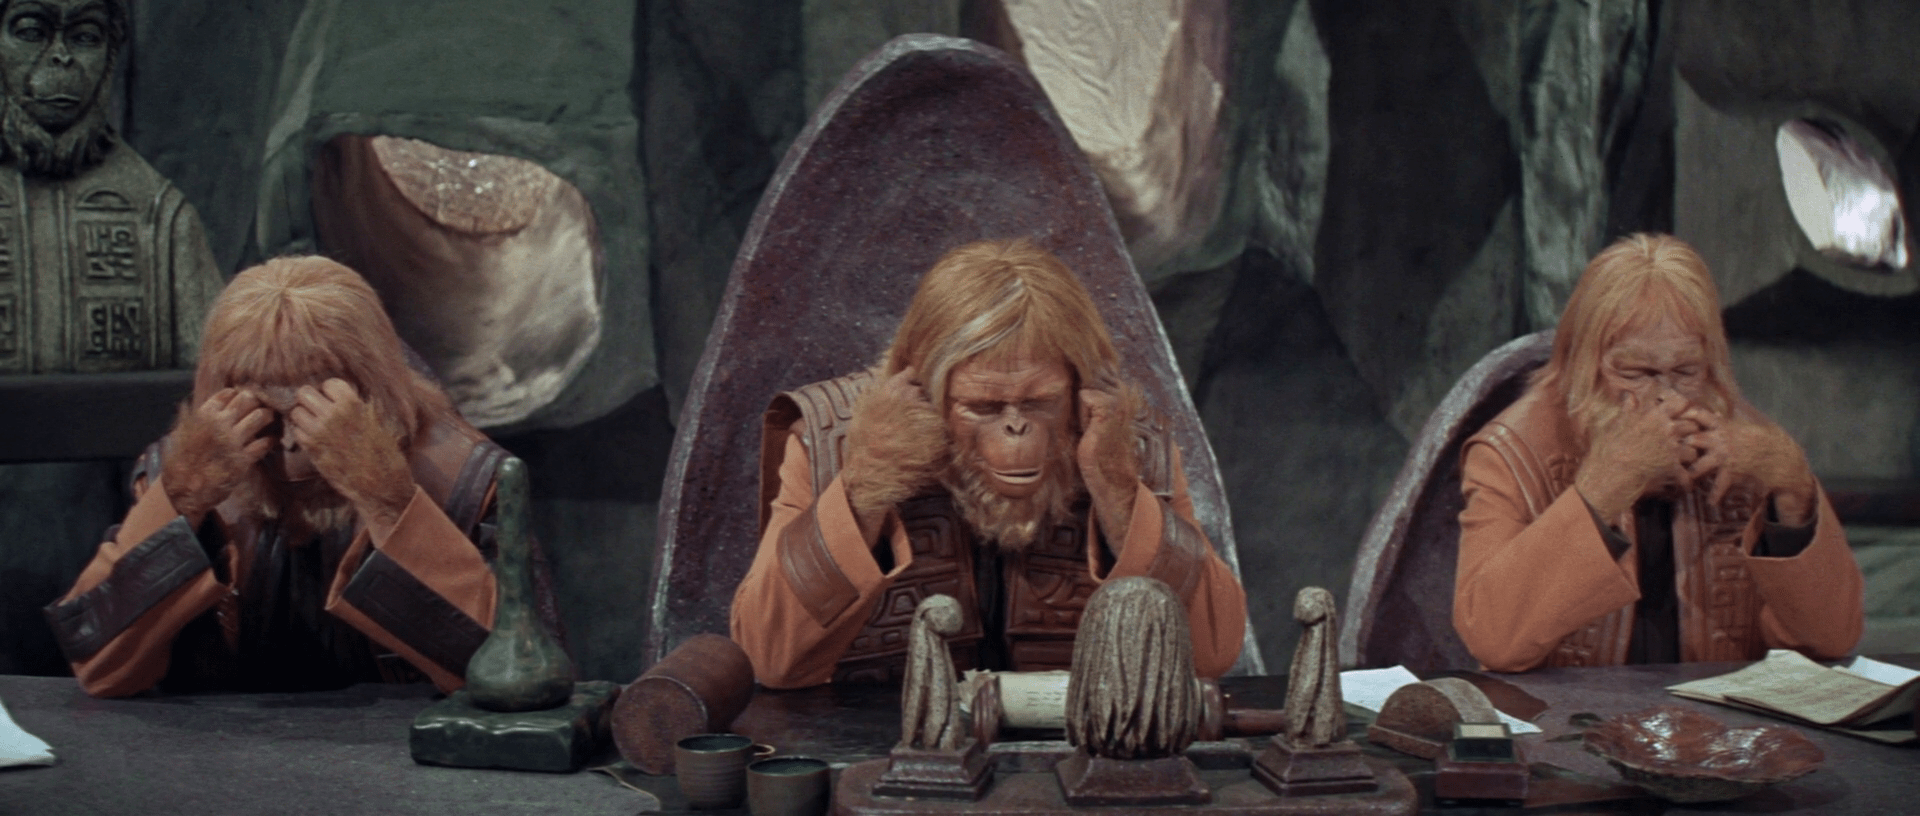 Planet of the Apes, 1968